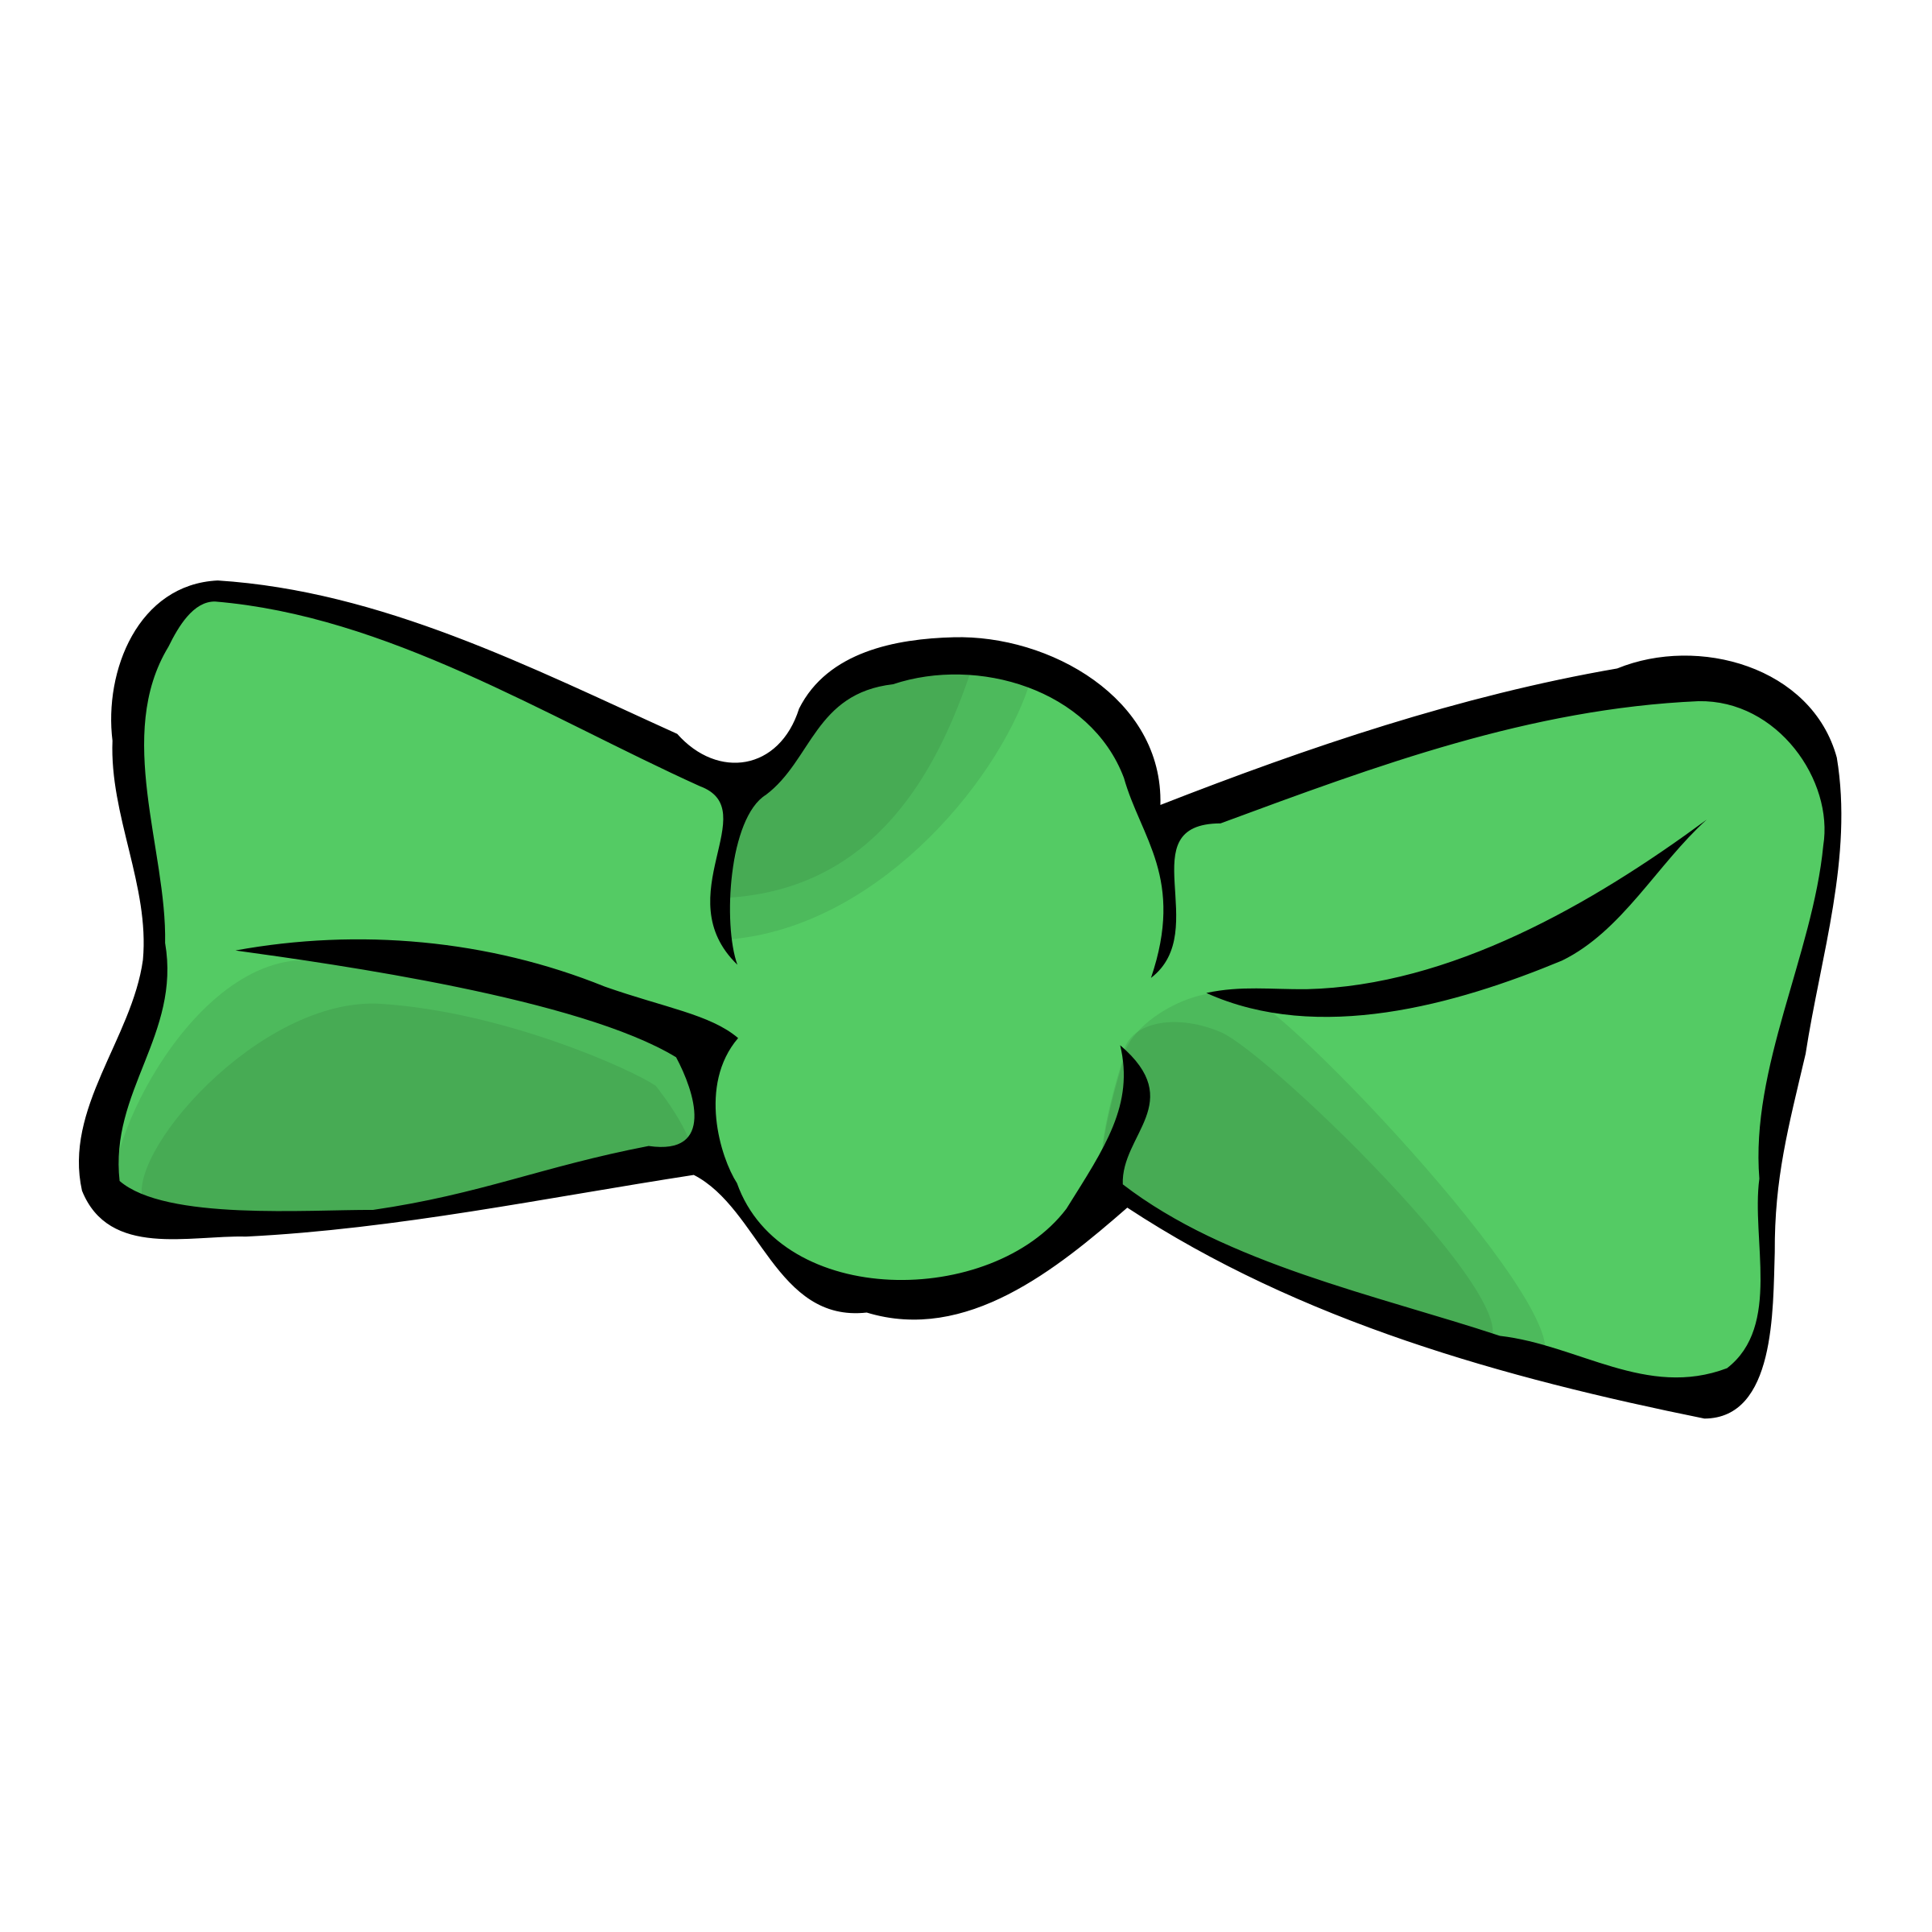 green bow tie clipart download best green bow tie clipart clipartmagm #30704